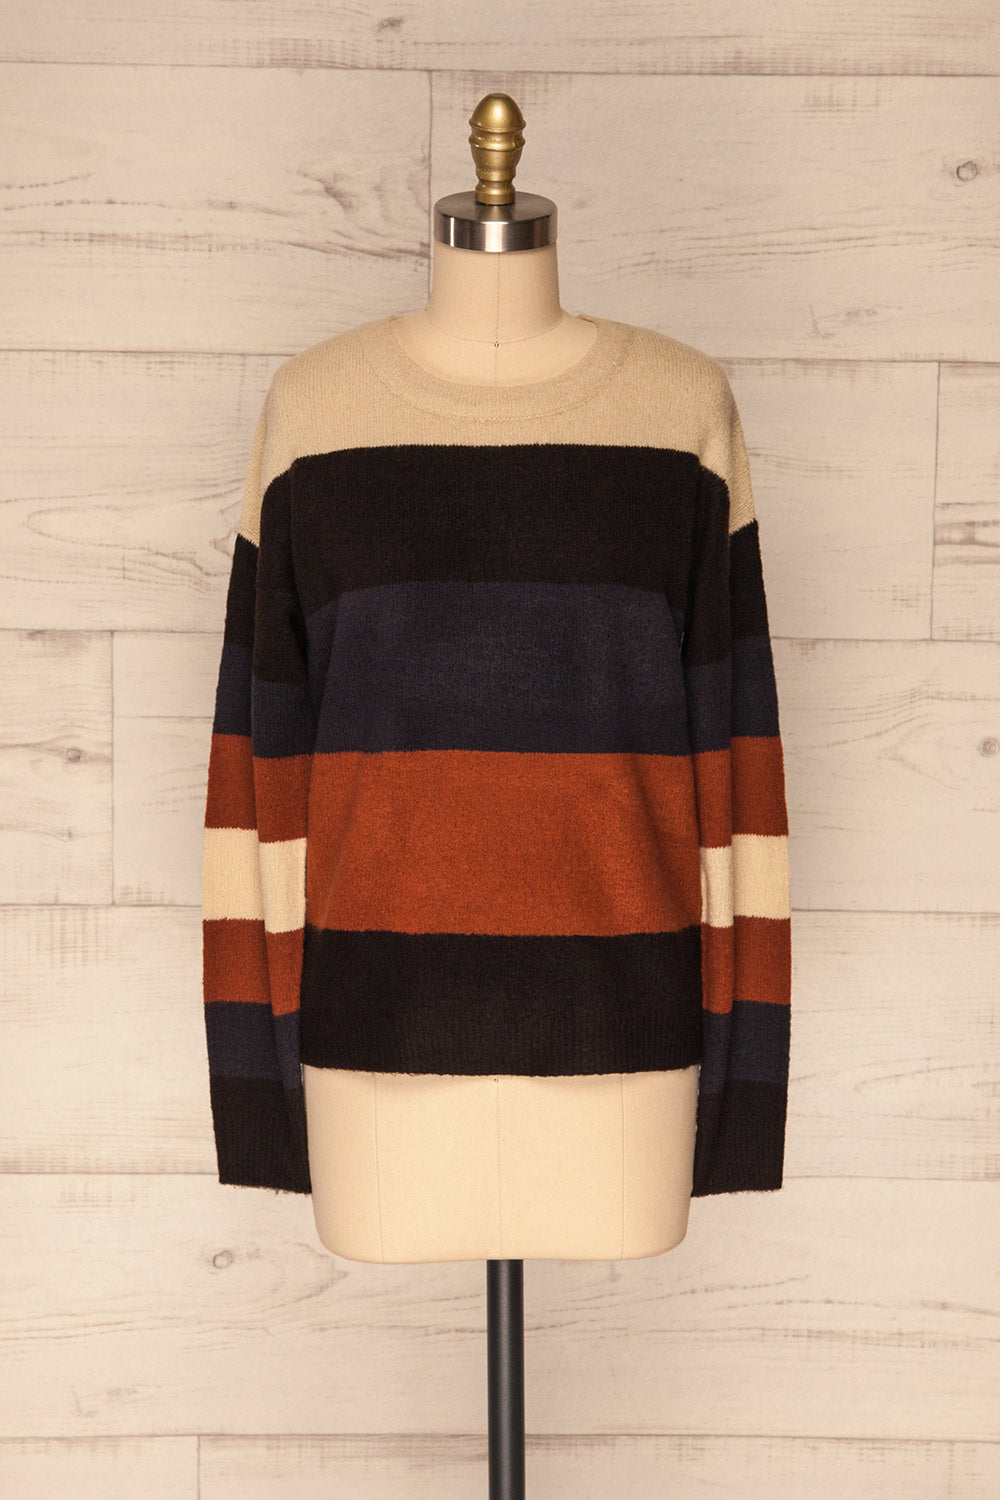 Faarland Black and Brown Striped Knit Sweater | La Petite Garçonne front view 